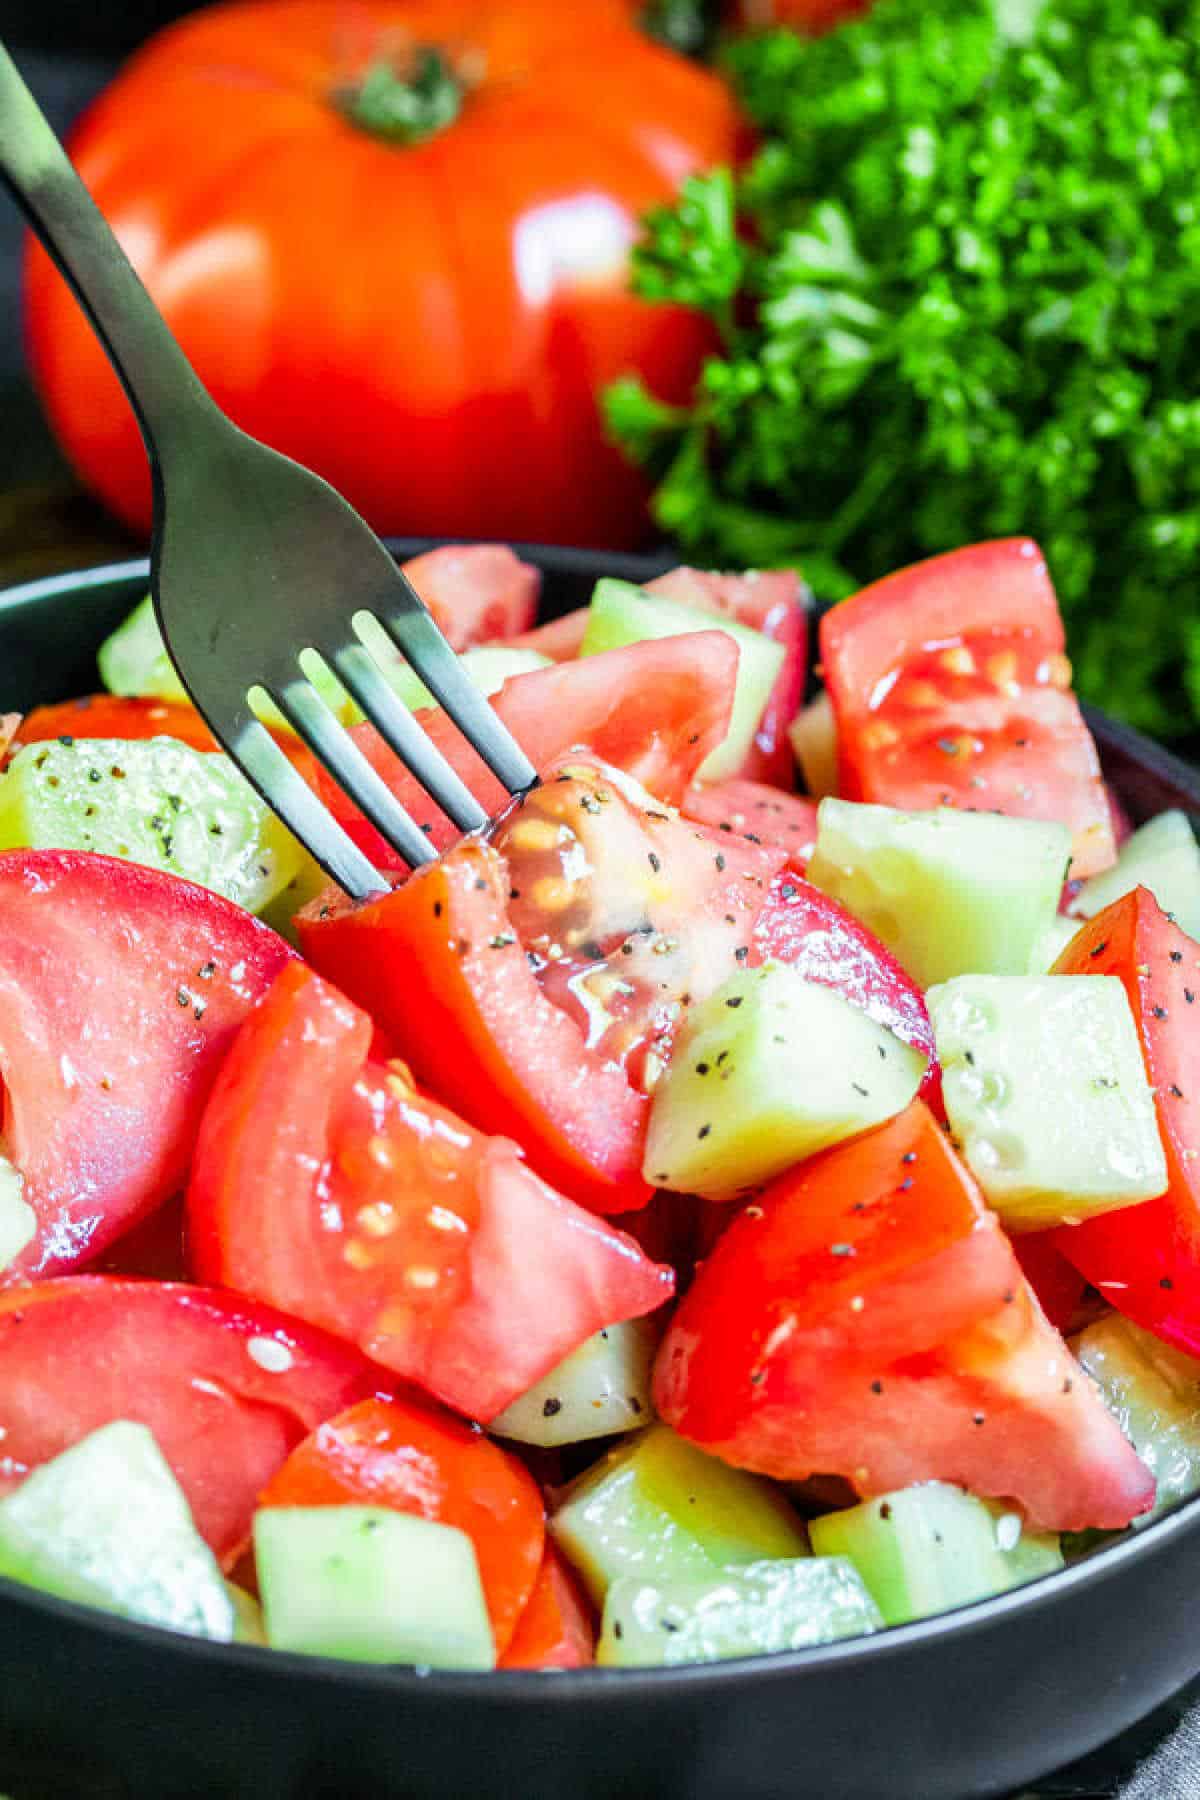 Tomato Cucumber Salad in a bowl with a tomato on a black fork